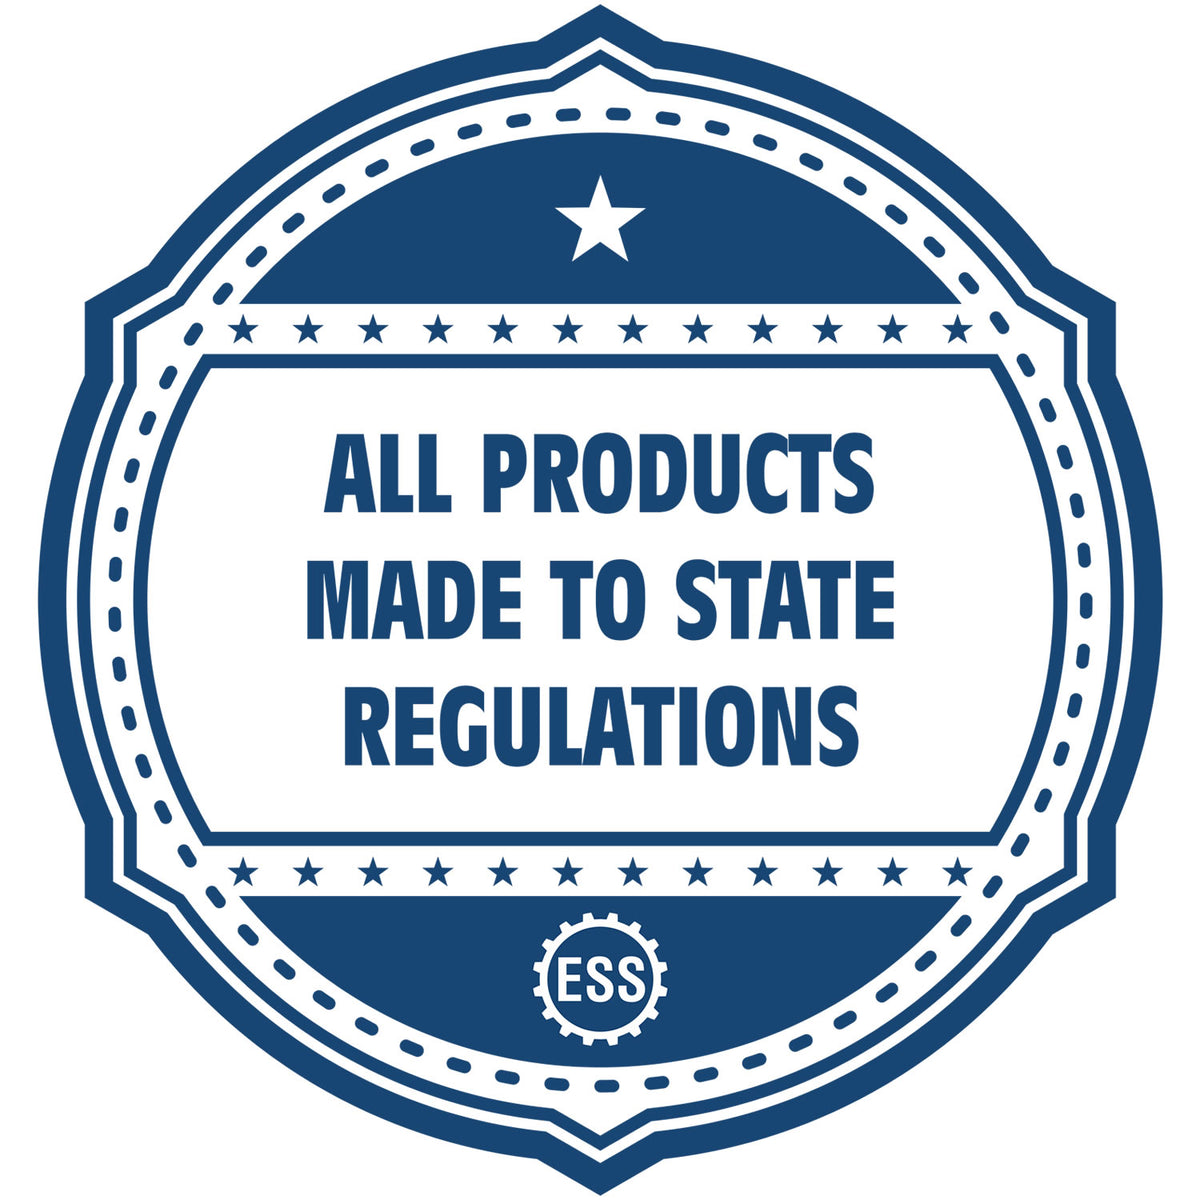 A blue icon or badge for the Heavy Duty Cast Iron New York Geologist Seal Embosser showing that this product is made in compliance with state regulations.